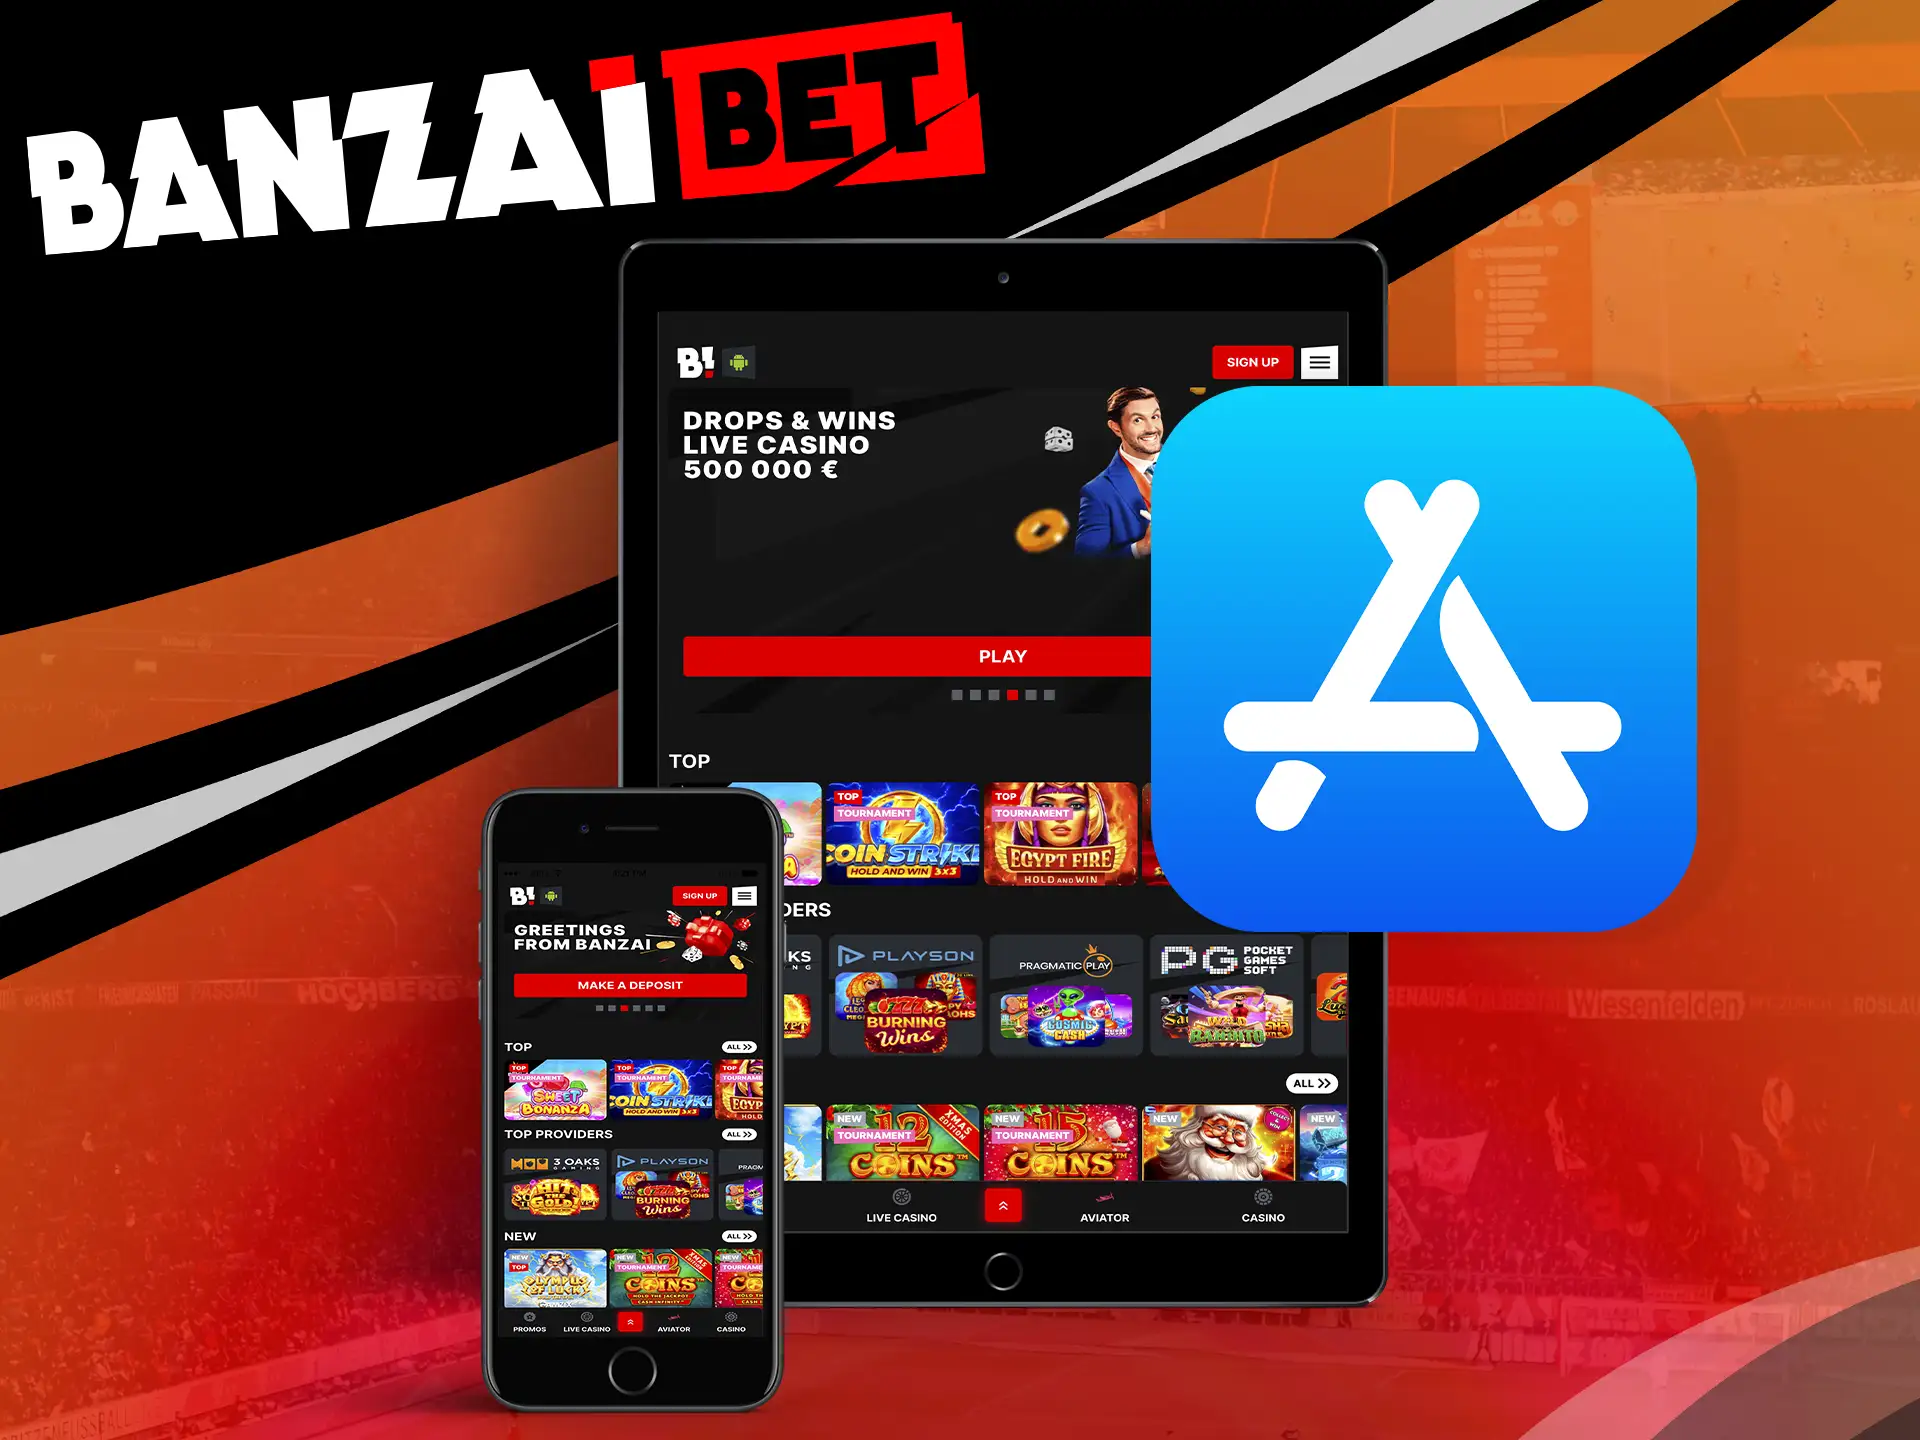 The Banzai App software for Apple provides an enjoyable experience for players, similar to the Android platform, and also runs faster.